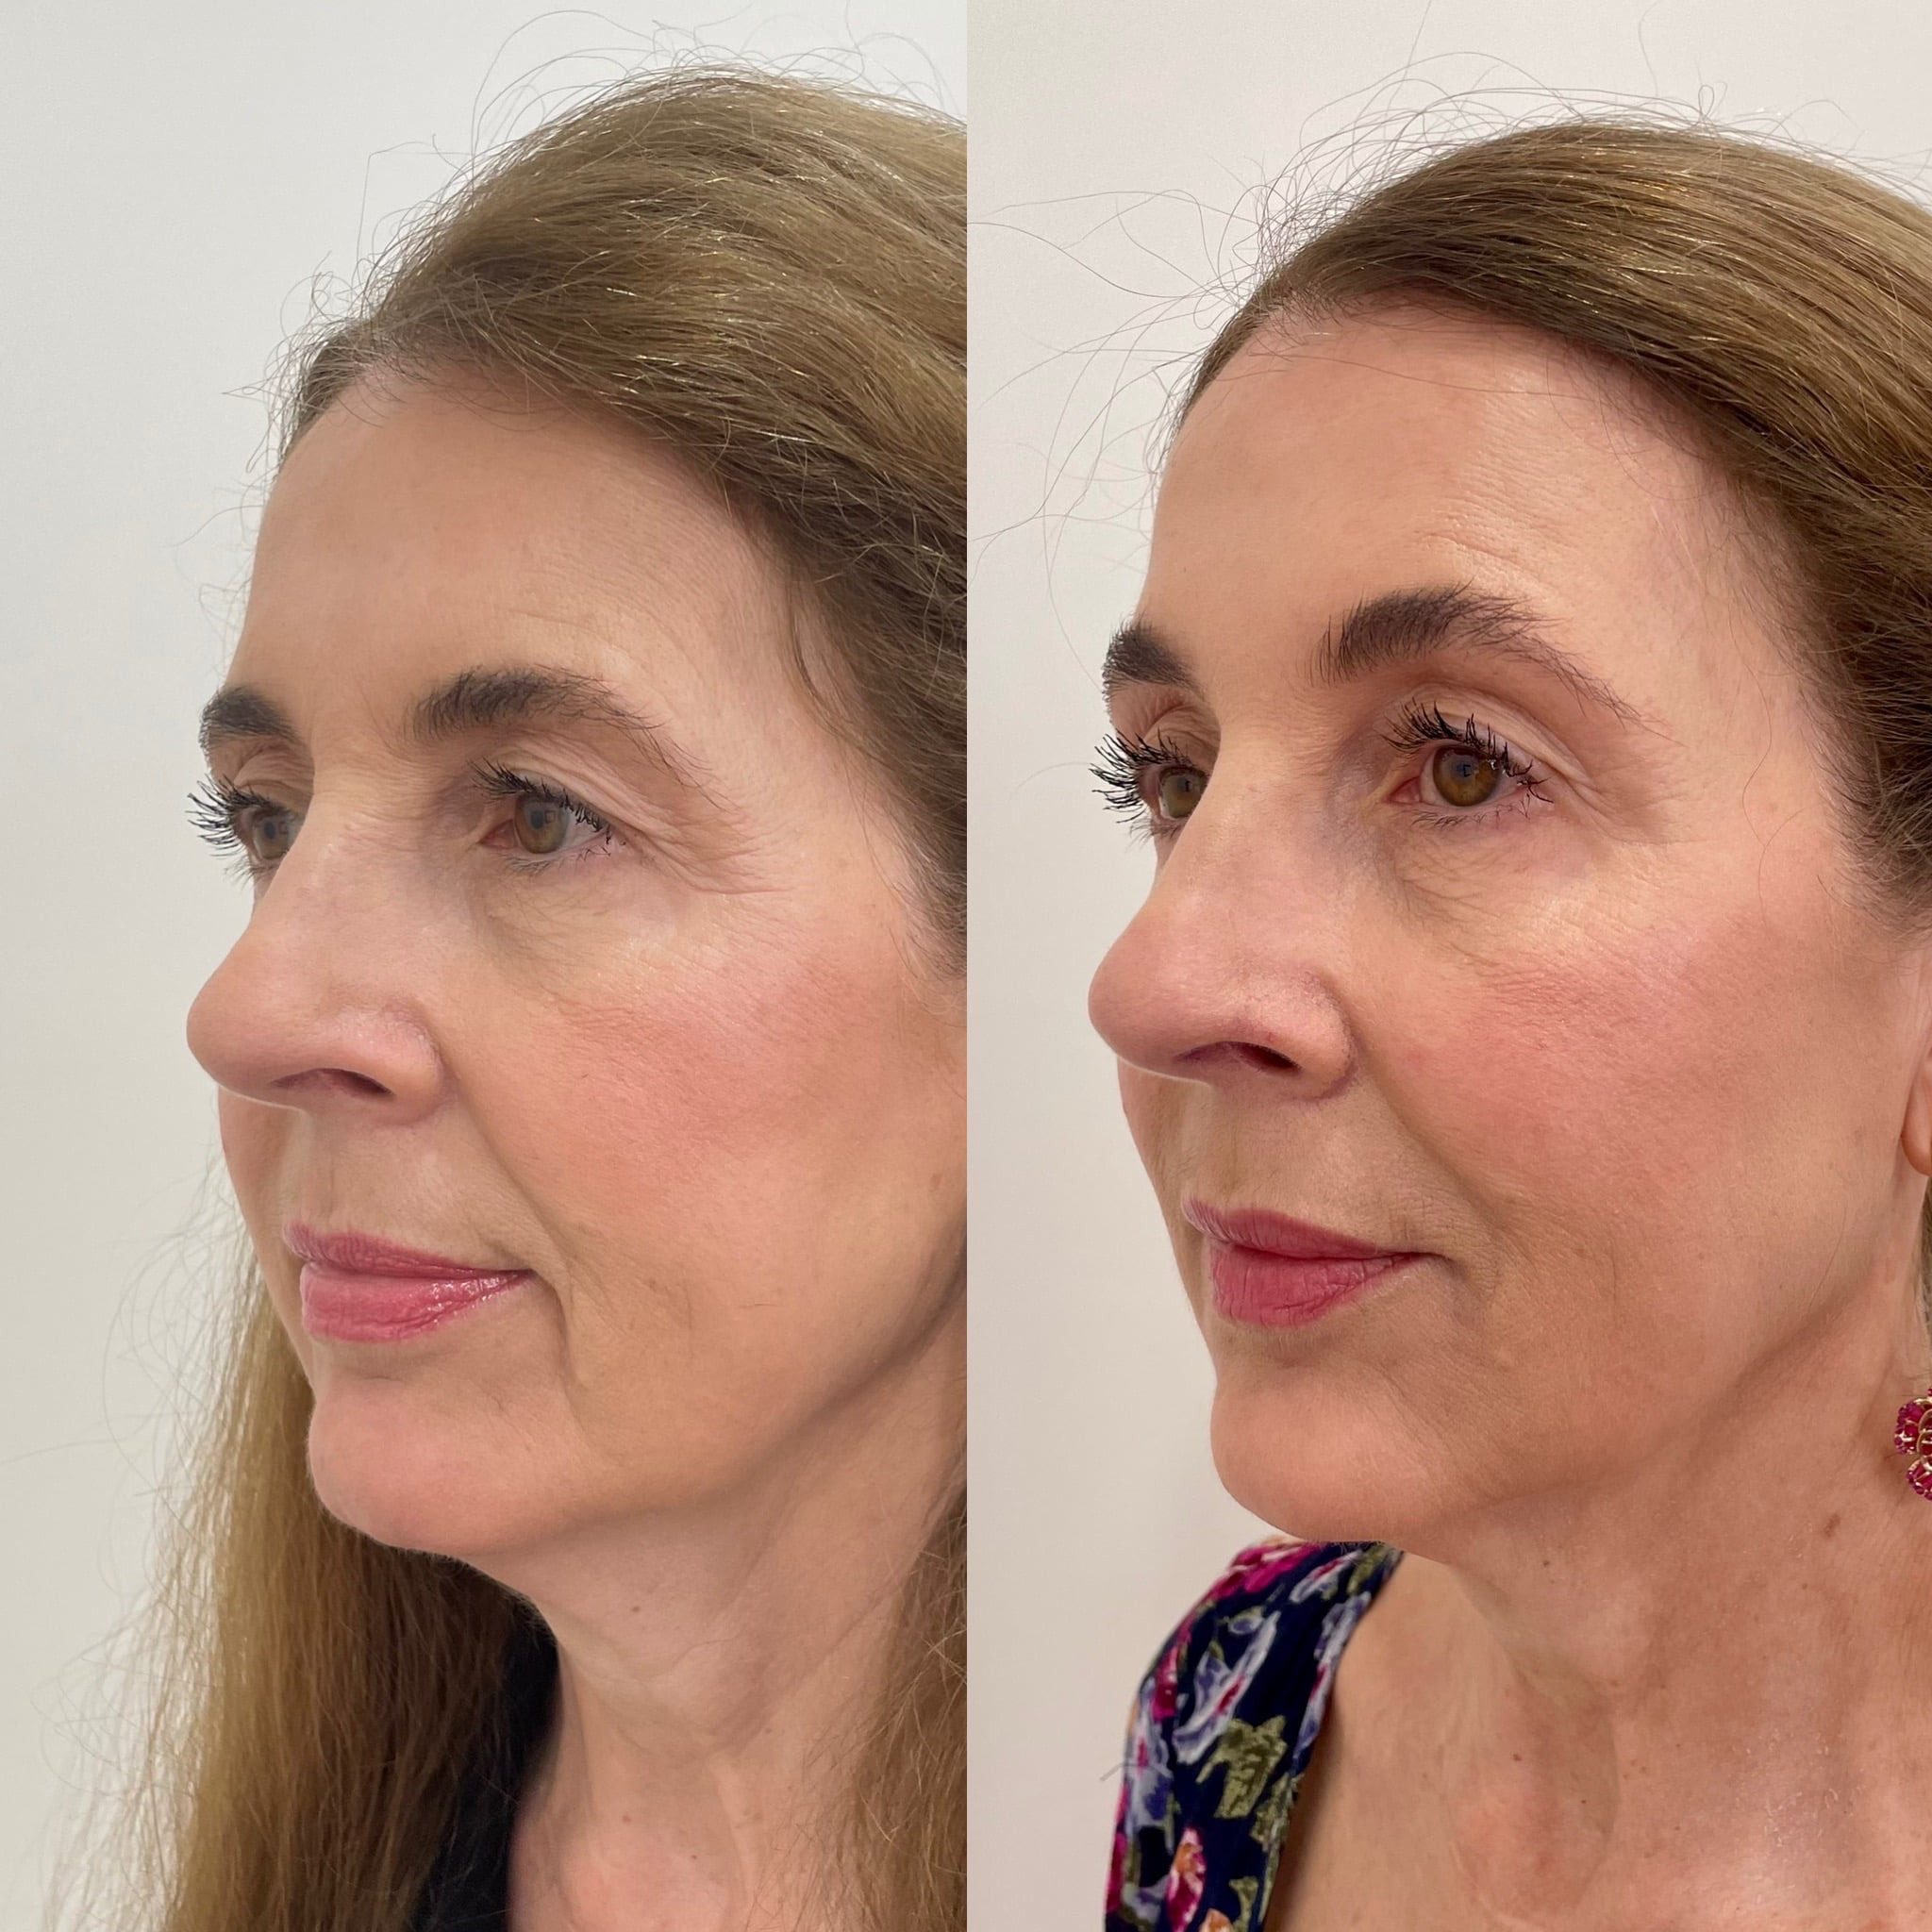 Before and After Fillers Temples treatment | Beauty Boost Med Spa at Newport Beach, CA